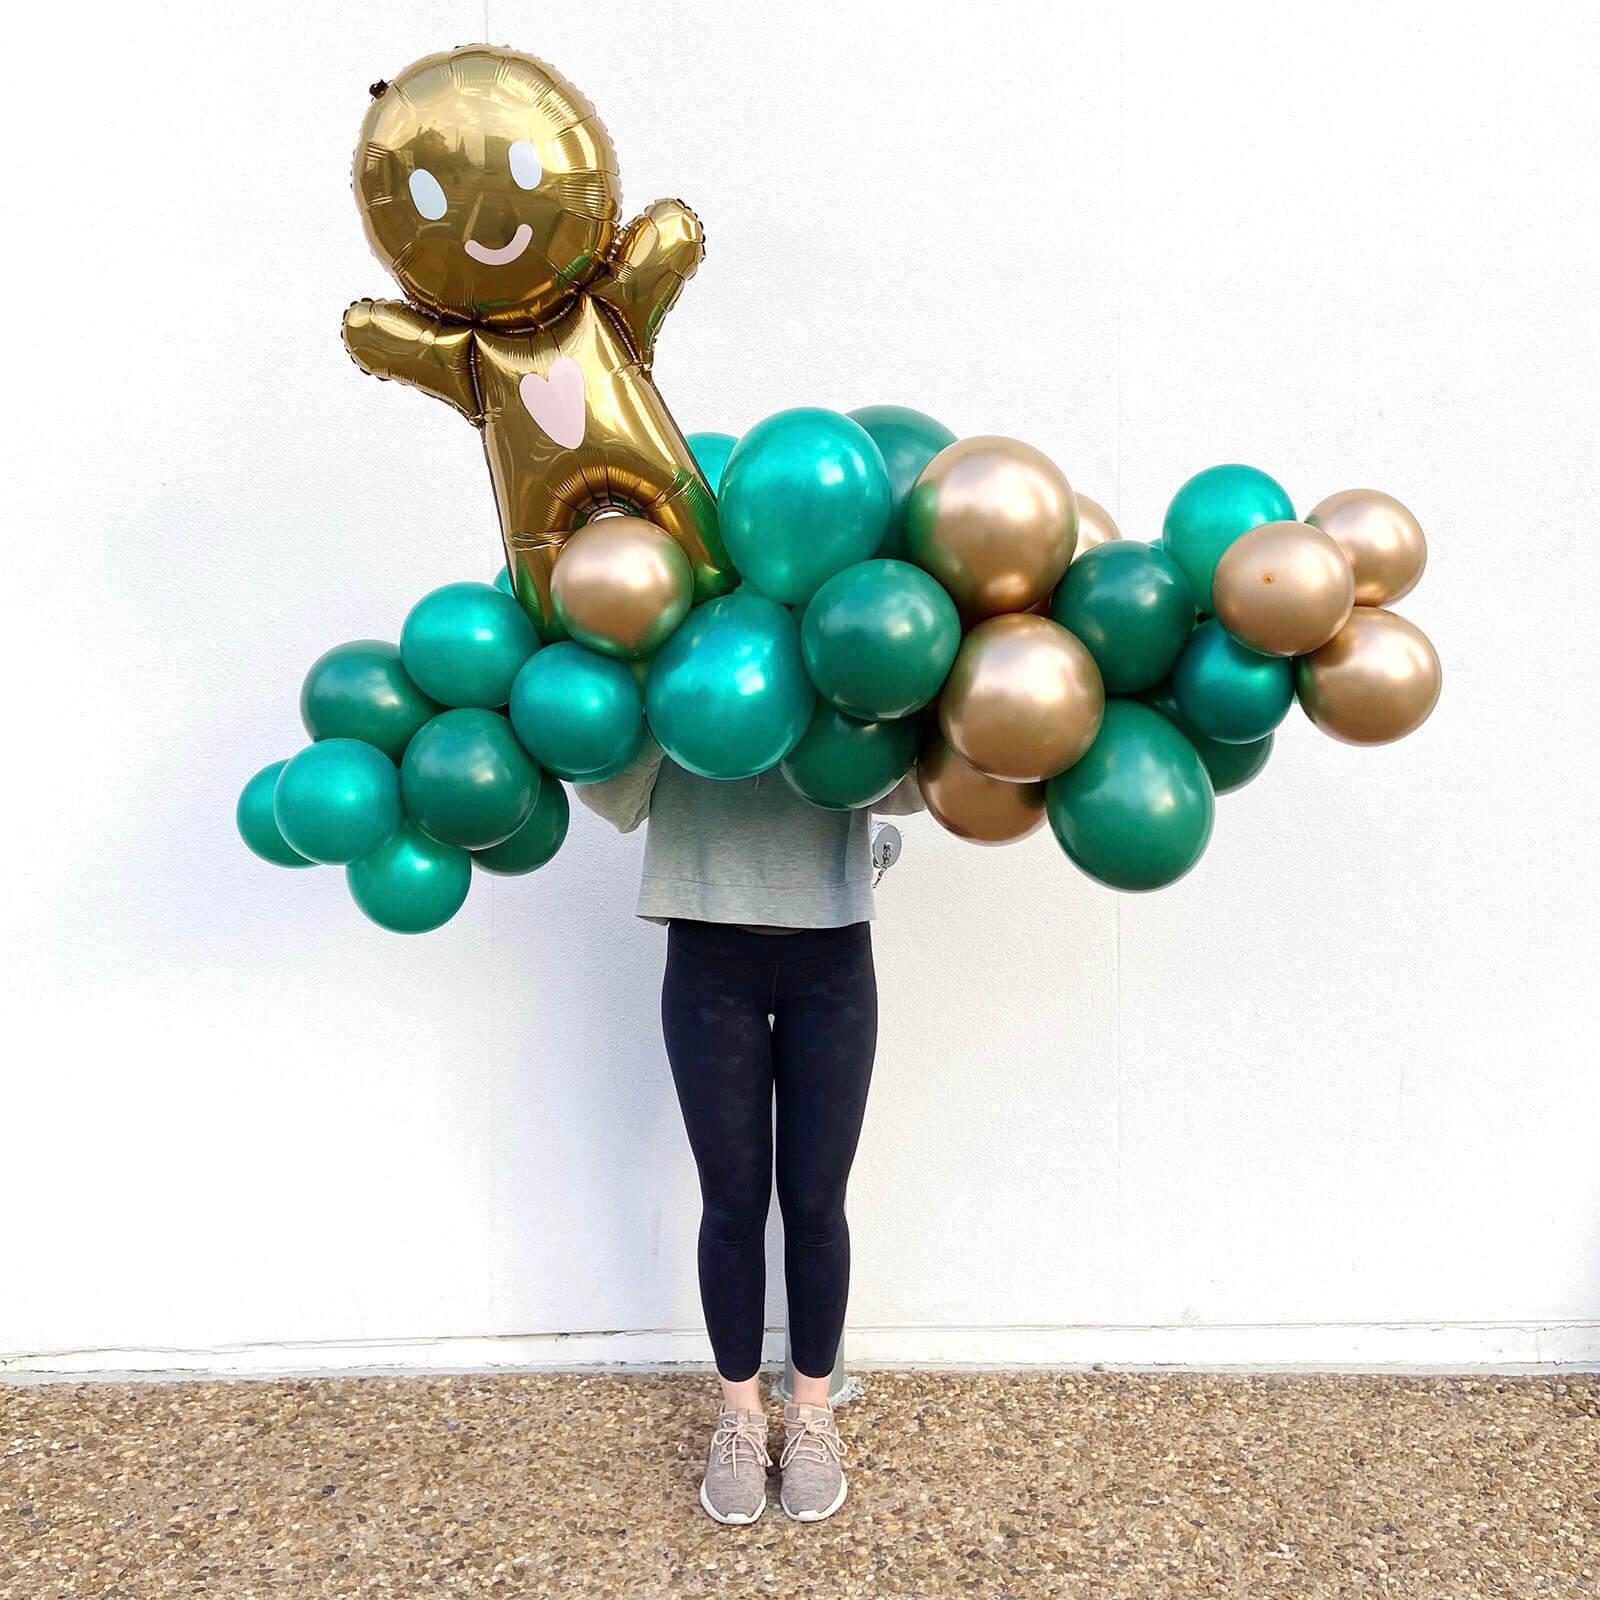 Evergreen holiday balloon garland with green and gold balloons, available from Just Peachy for Christmas.